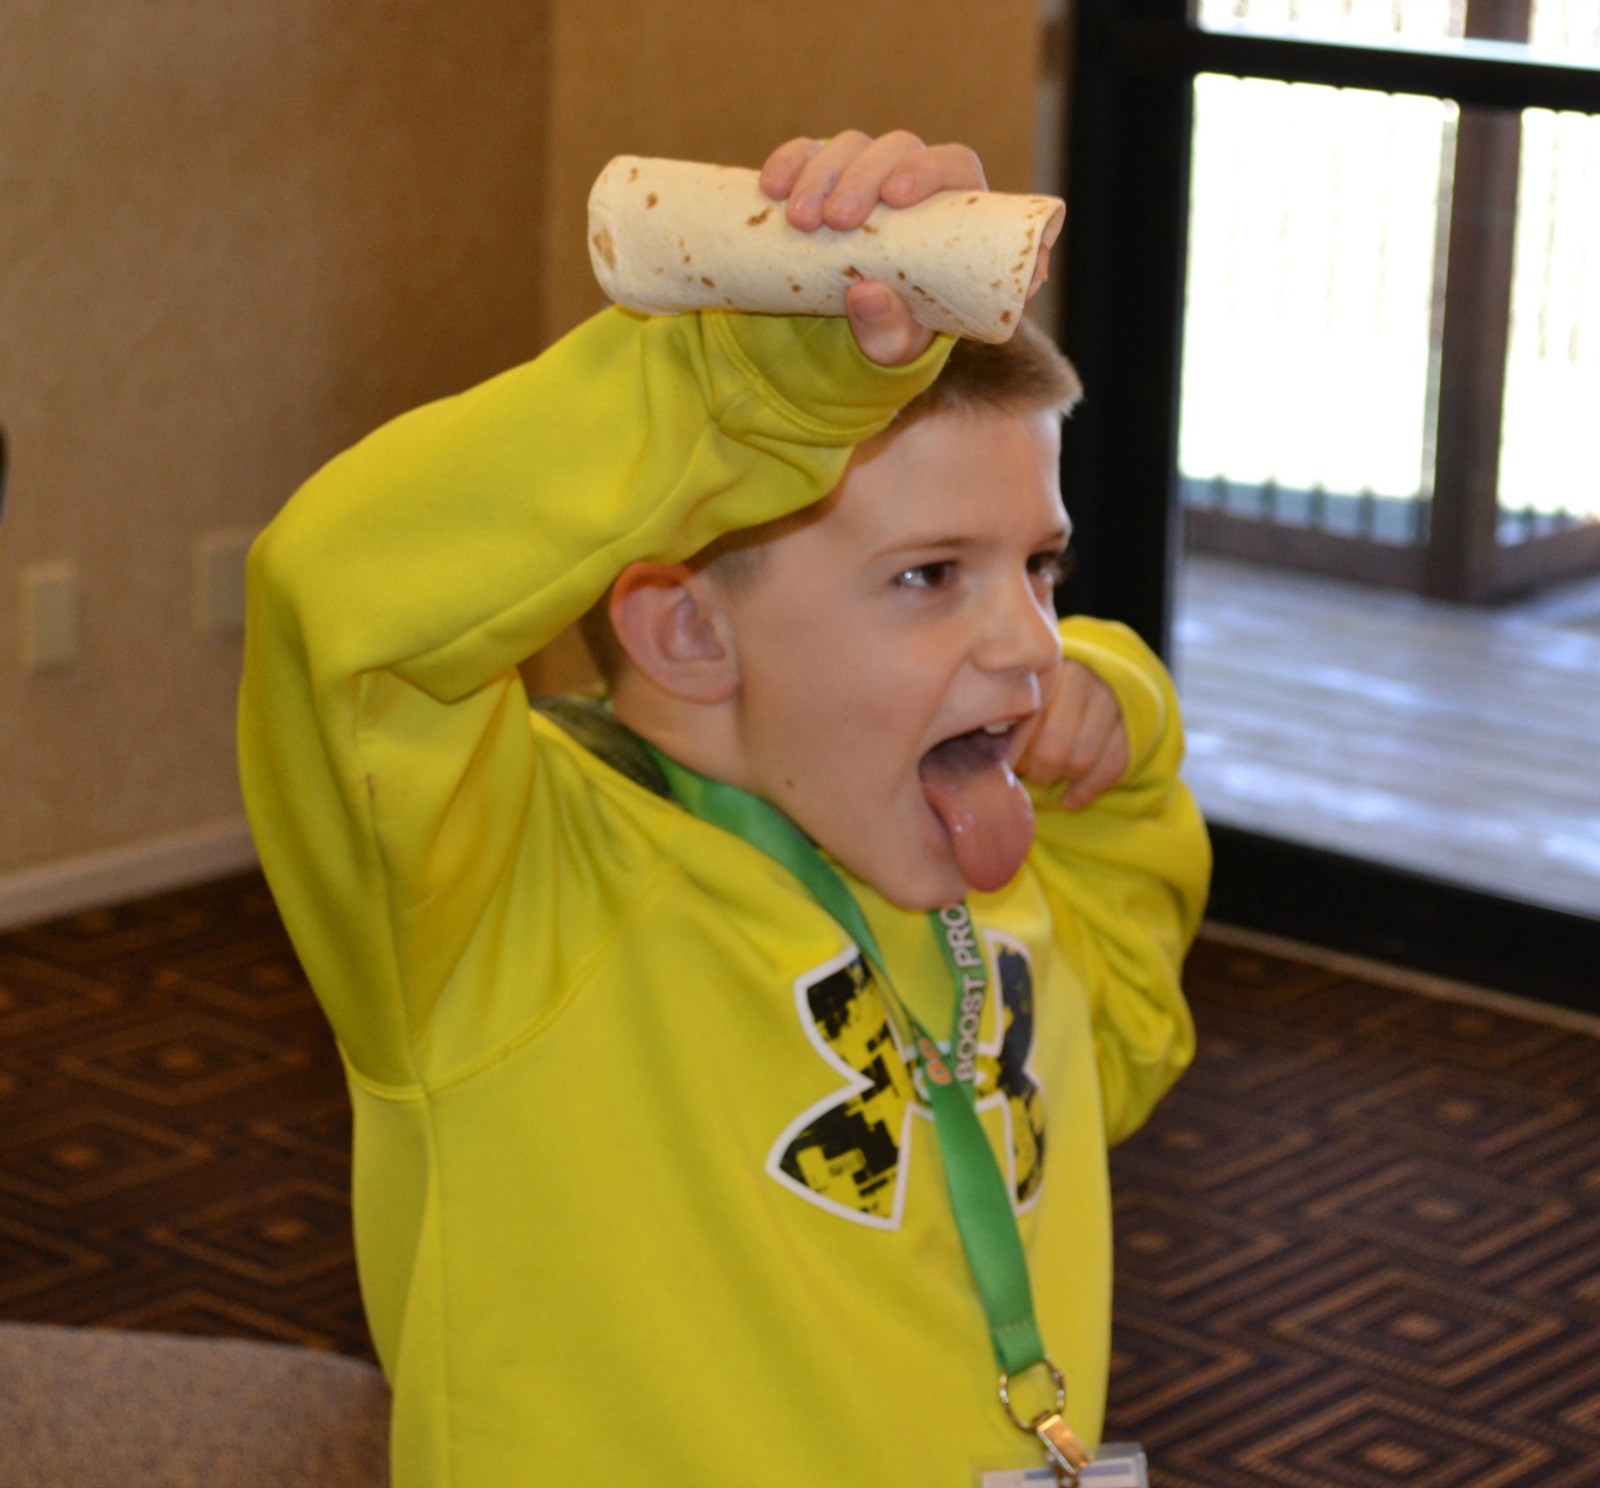 Tips on a Healthy Snack Workshop for kids that I presented at the WV State PTA Convention. 